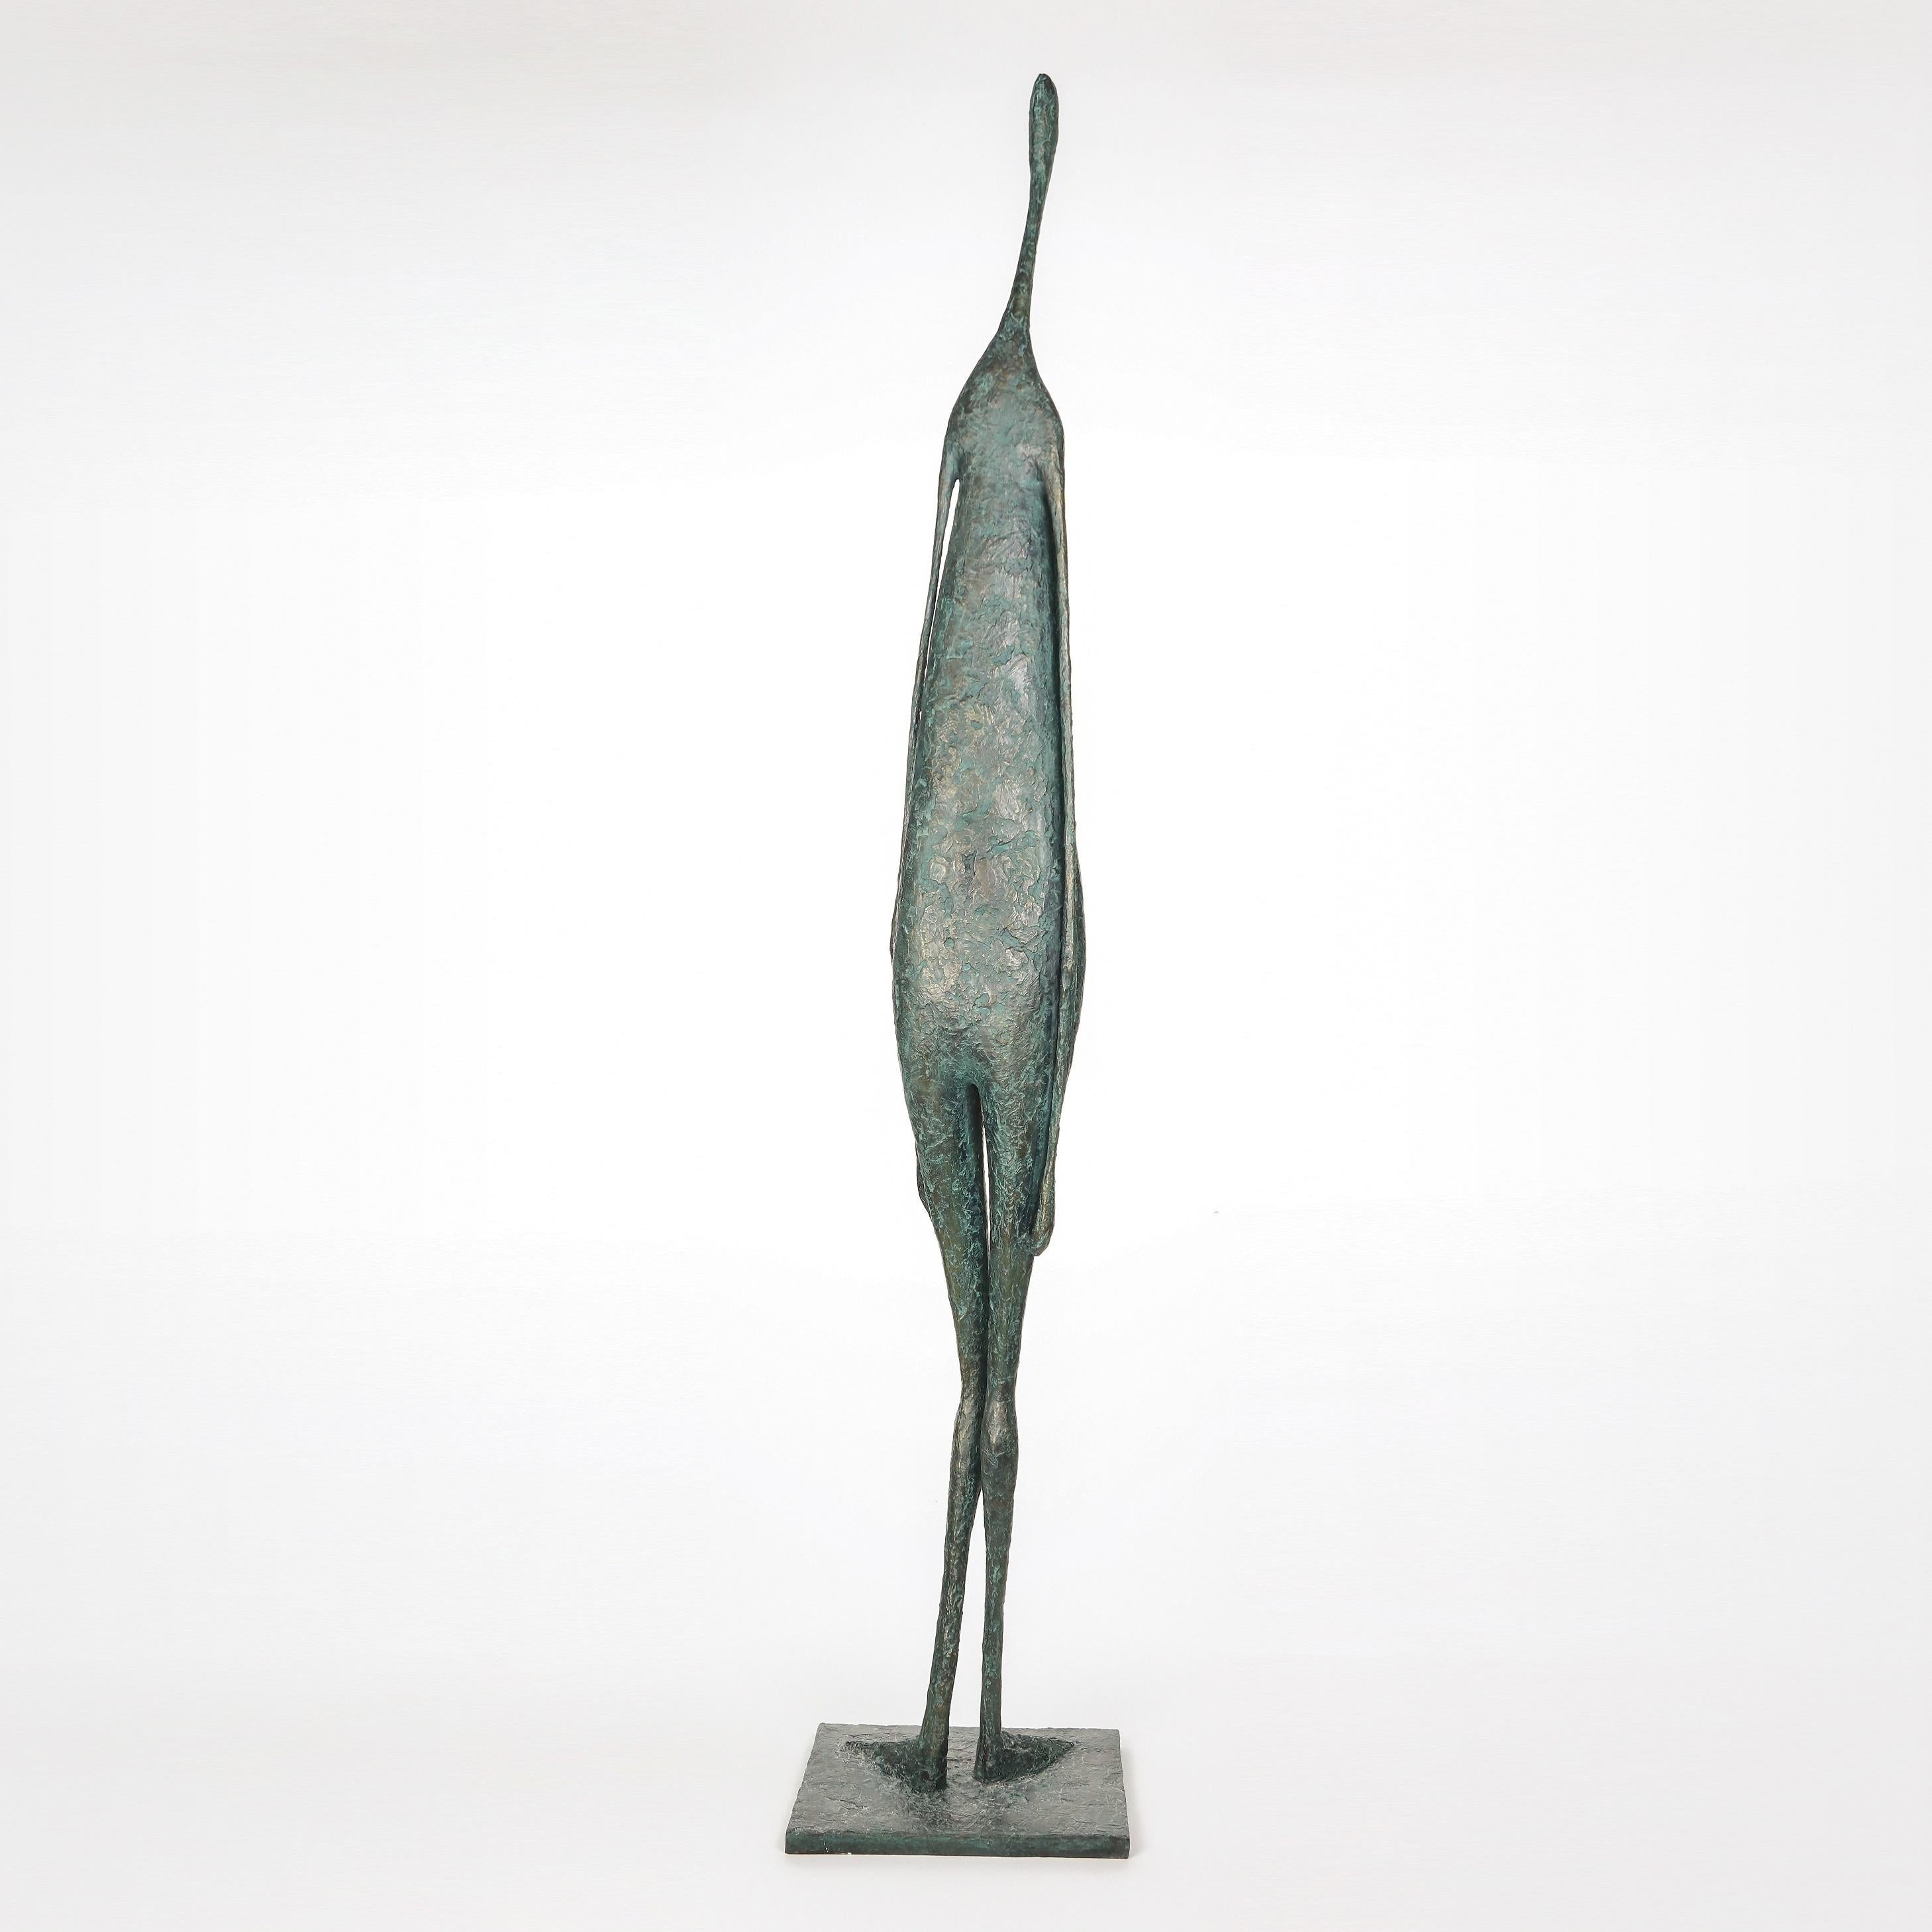 Large Standing Figure IV by Pierre Yermia - Contemporary bronze sculpture 2